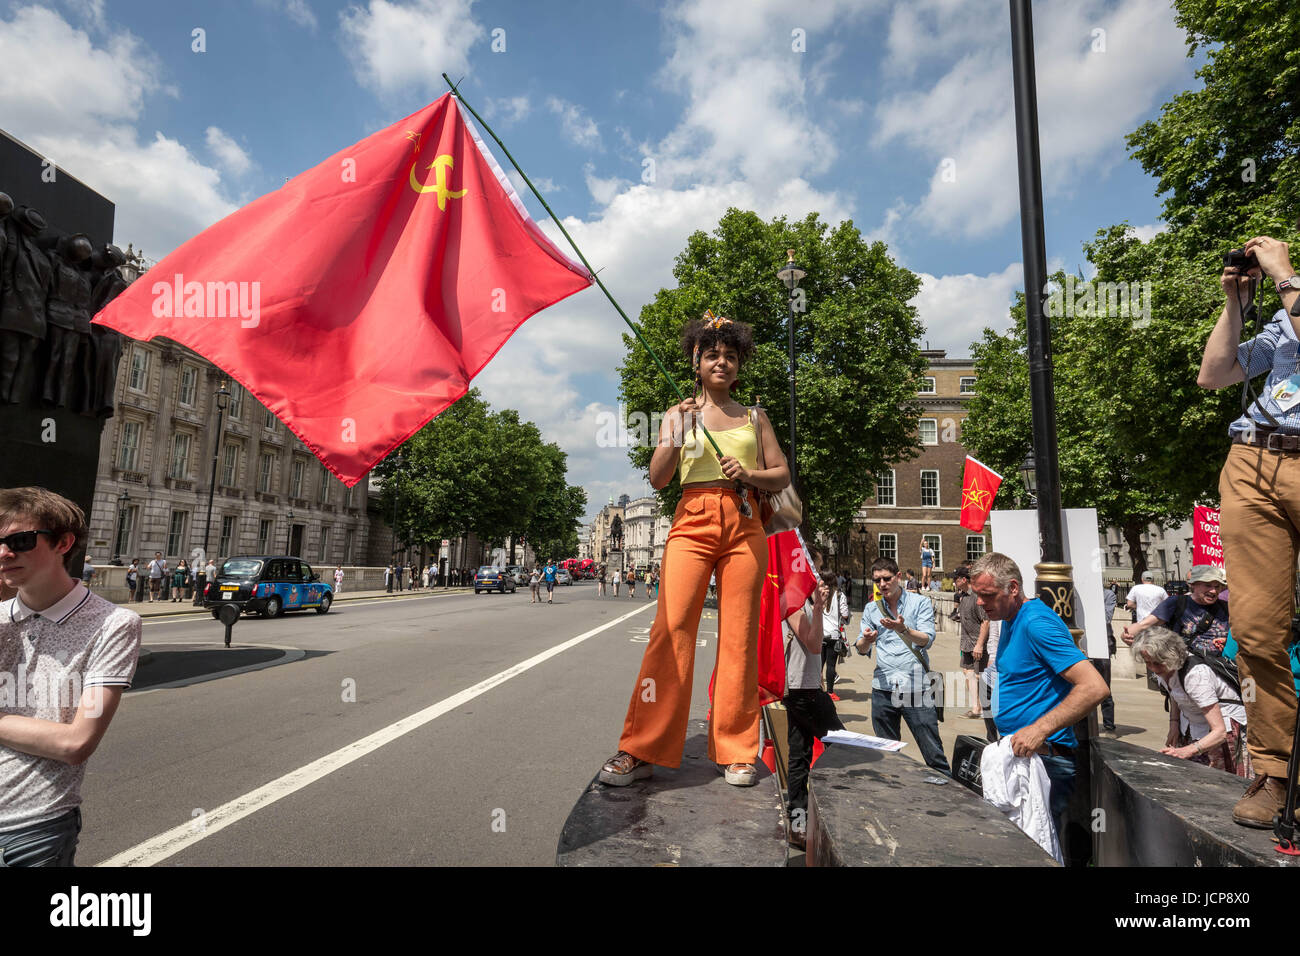 London, UK. 17th June, 2017. A young Venezuelan girl joins the anti-tory protest waving a communist flag in support of her fellow protesters battling the current political unrest in Caracas. Protest opposite Downing Street against PM Theresa May and Tory party DUP coalition. © Guy Corbishley/Alamy Live News Stock Photo